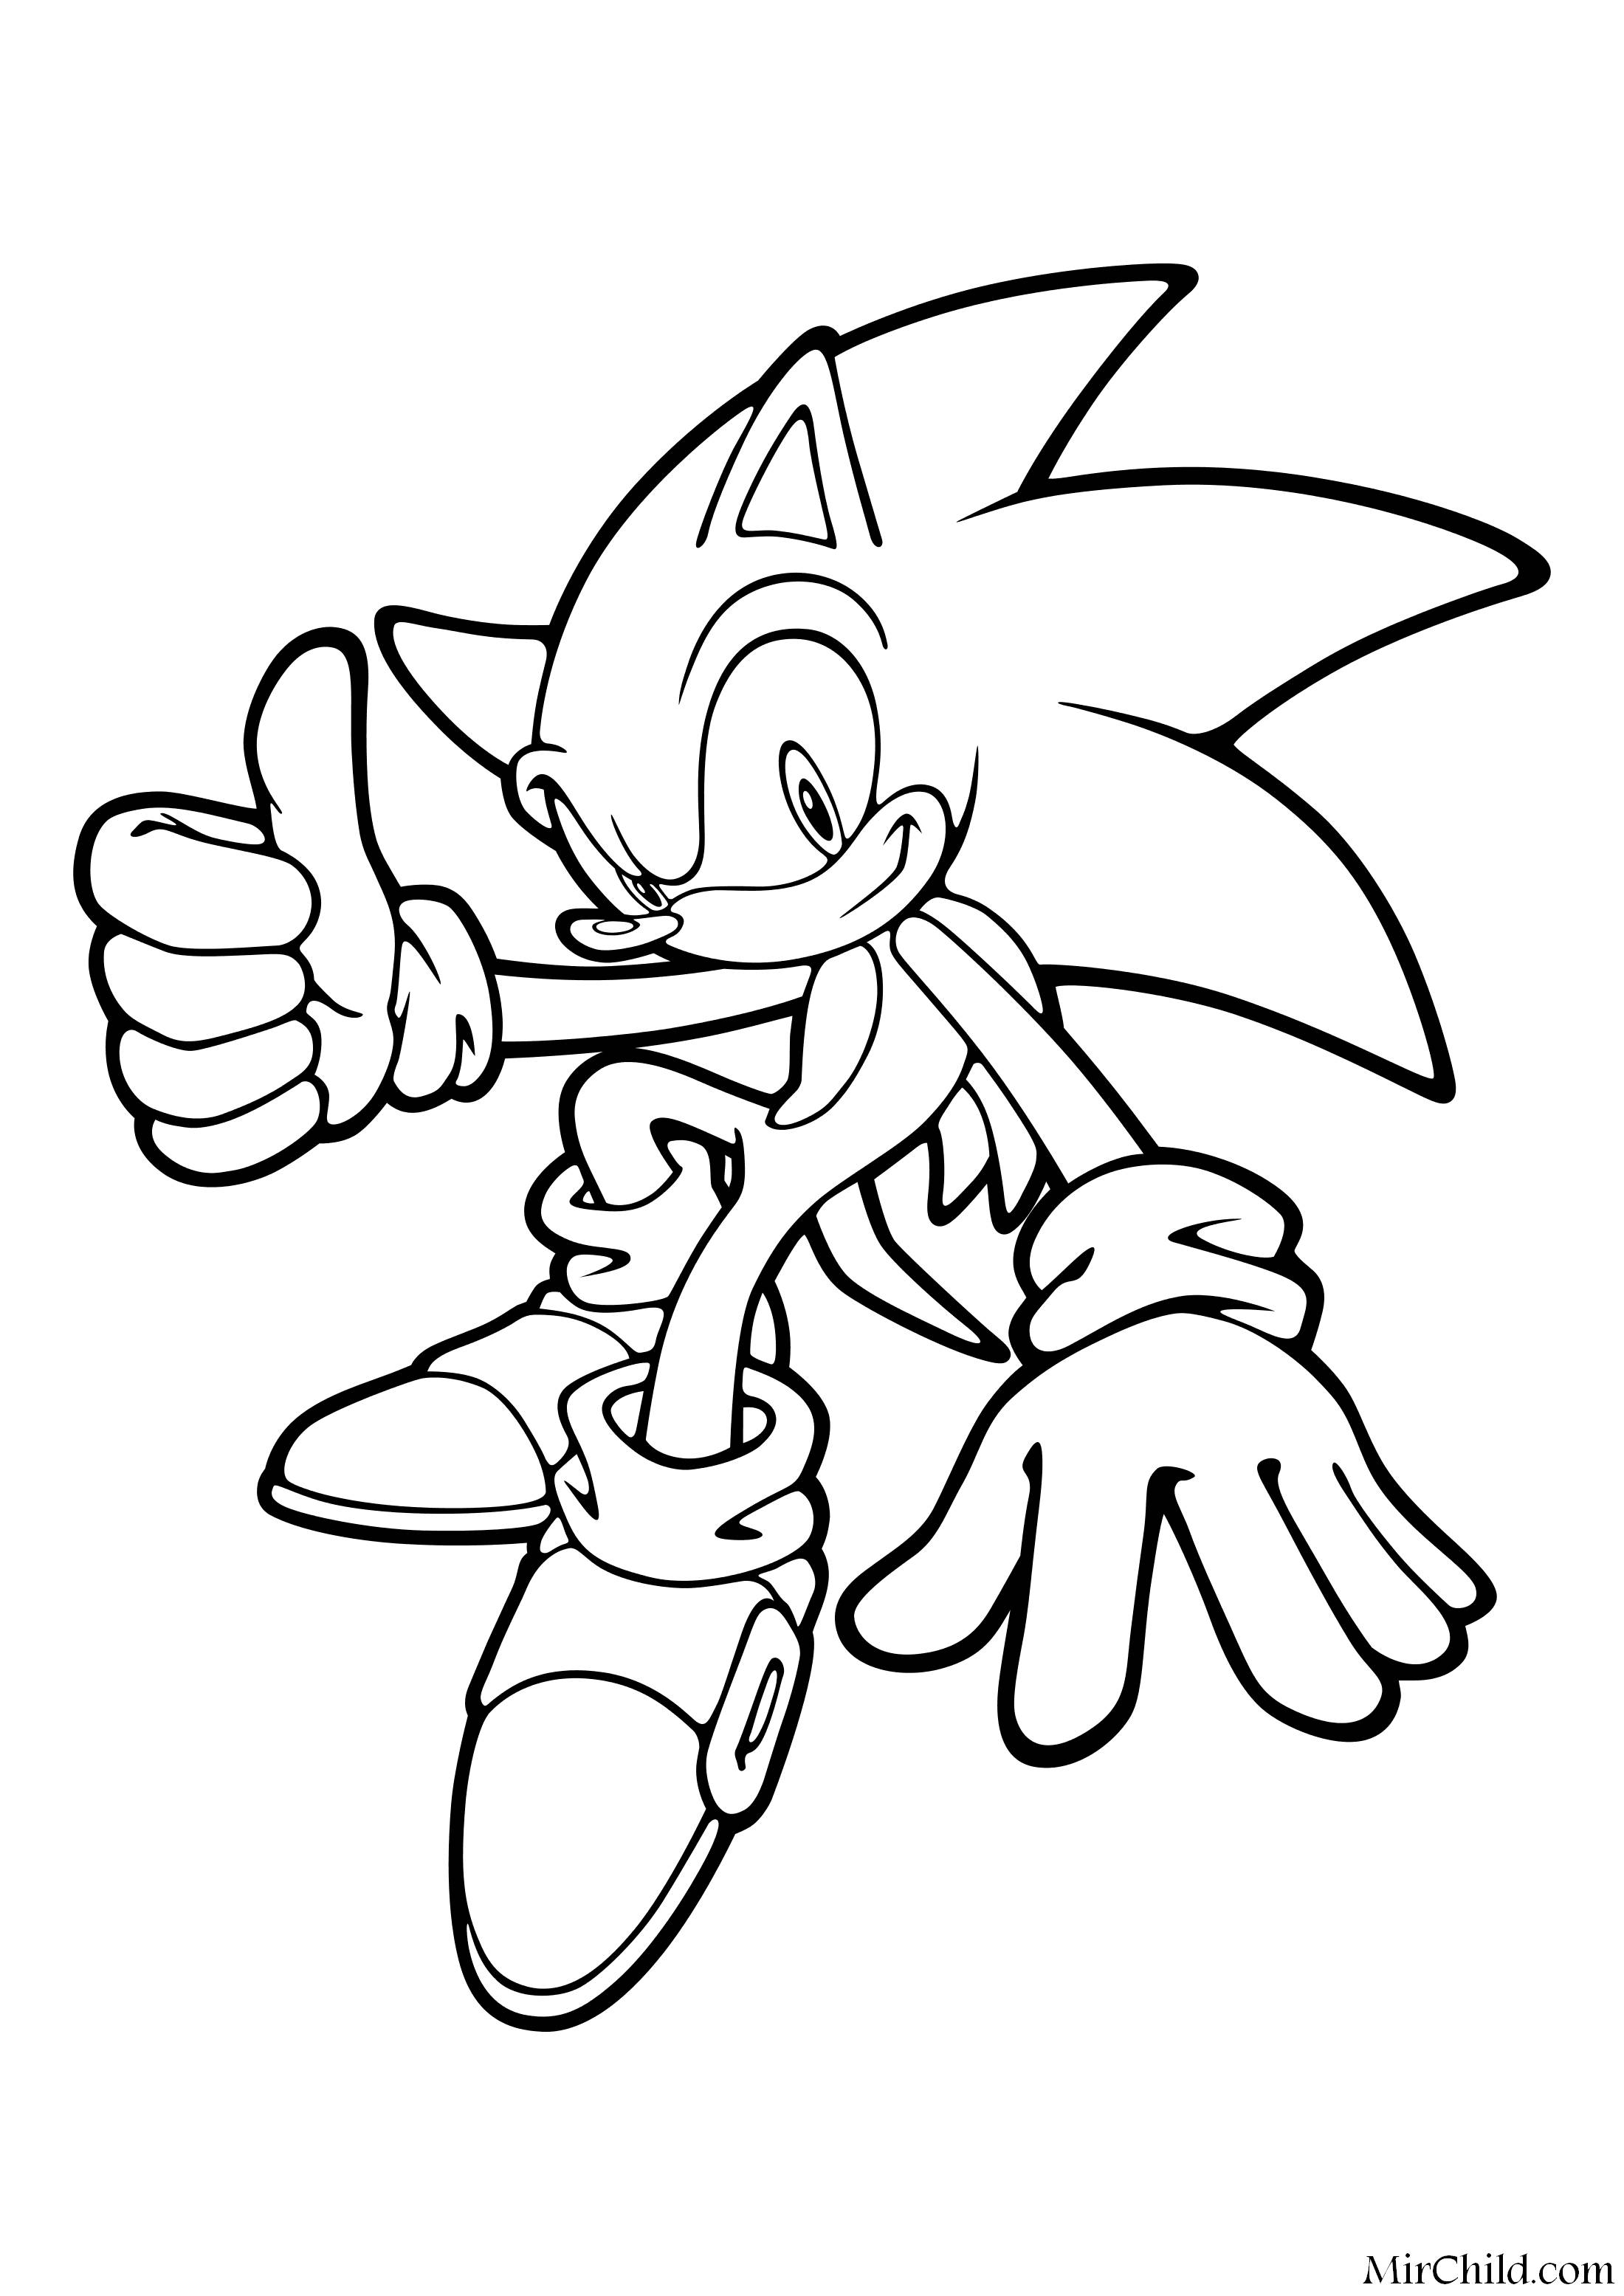 Great blue sonic coloring page